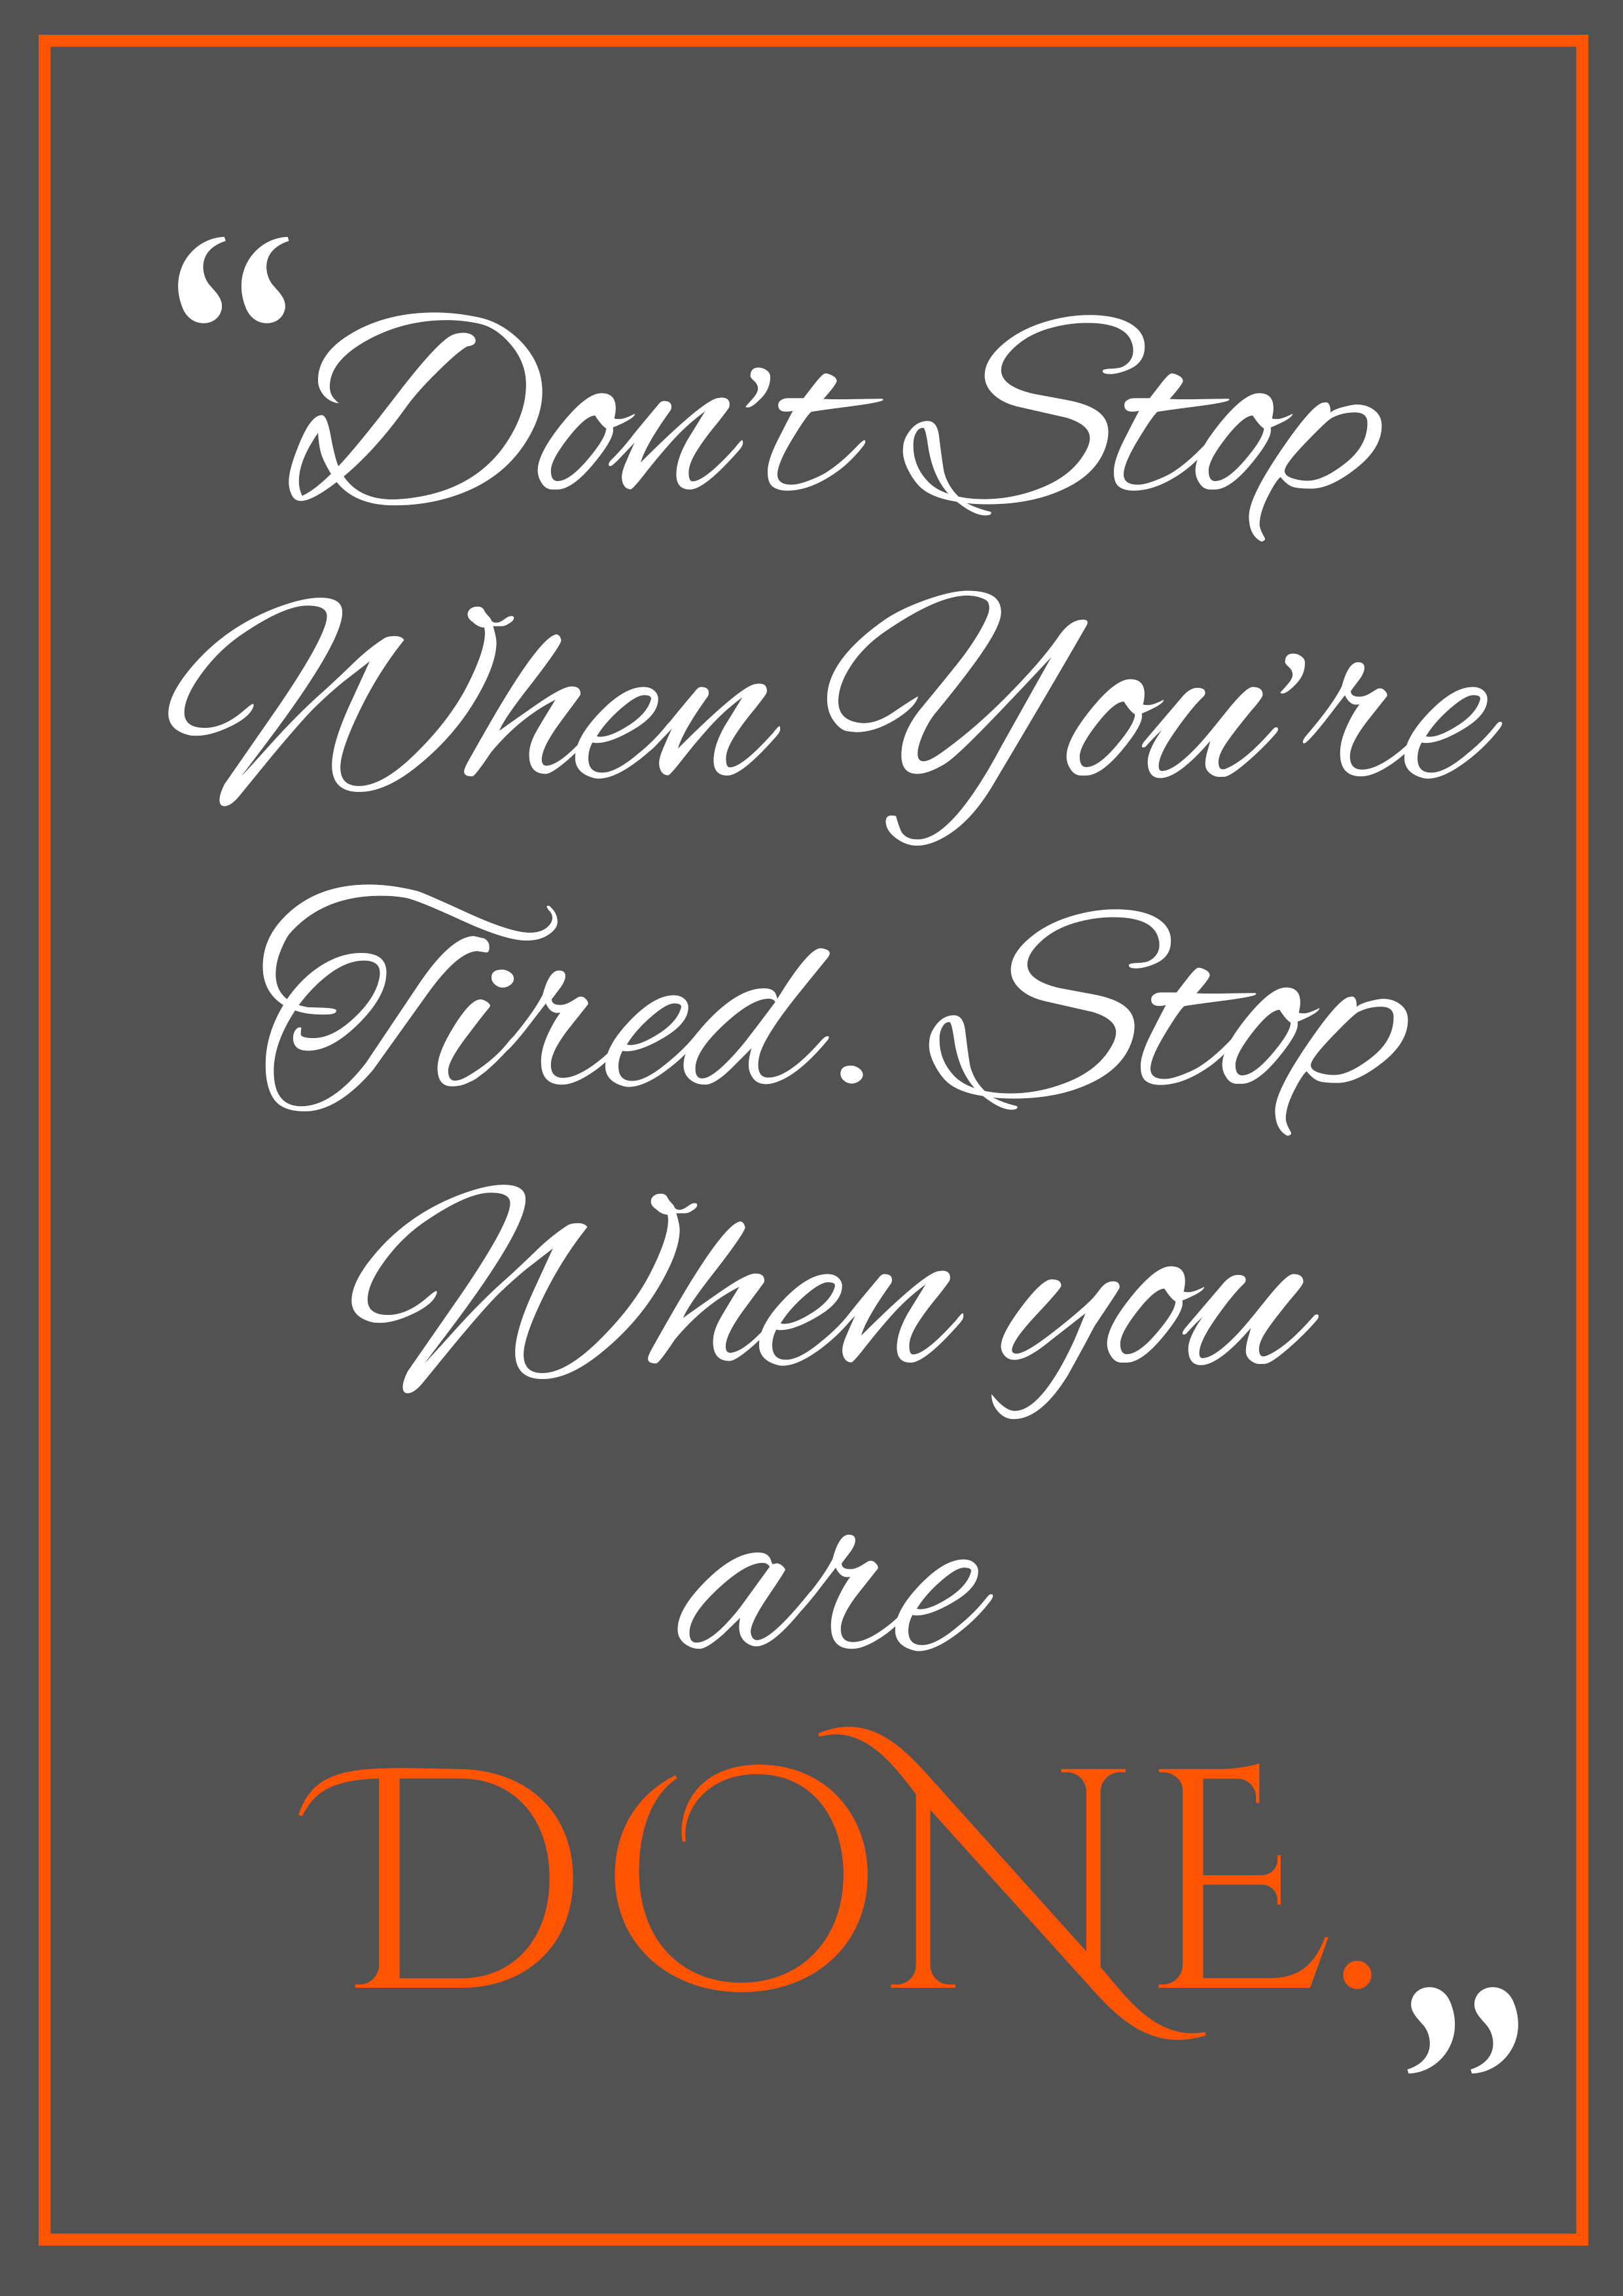 STOP WHEN YOU ARE DONE !